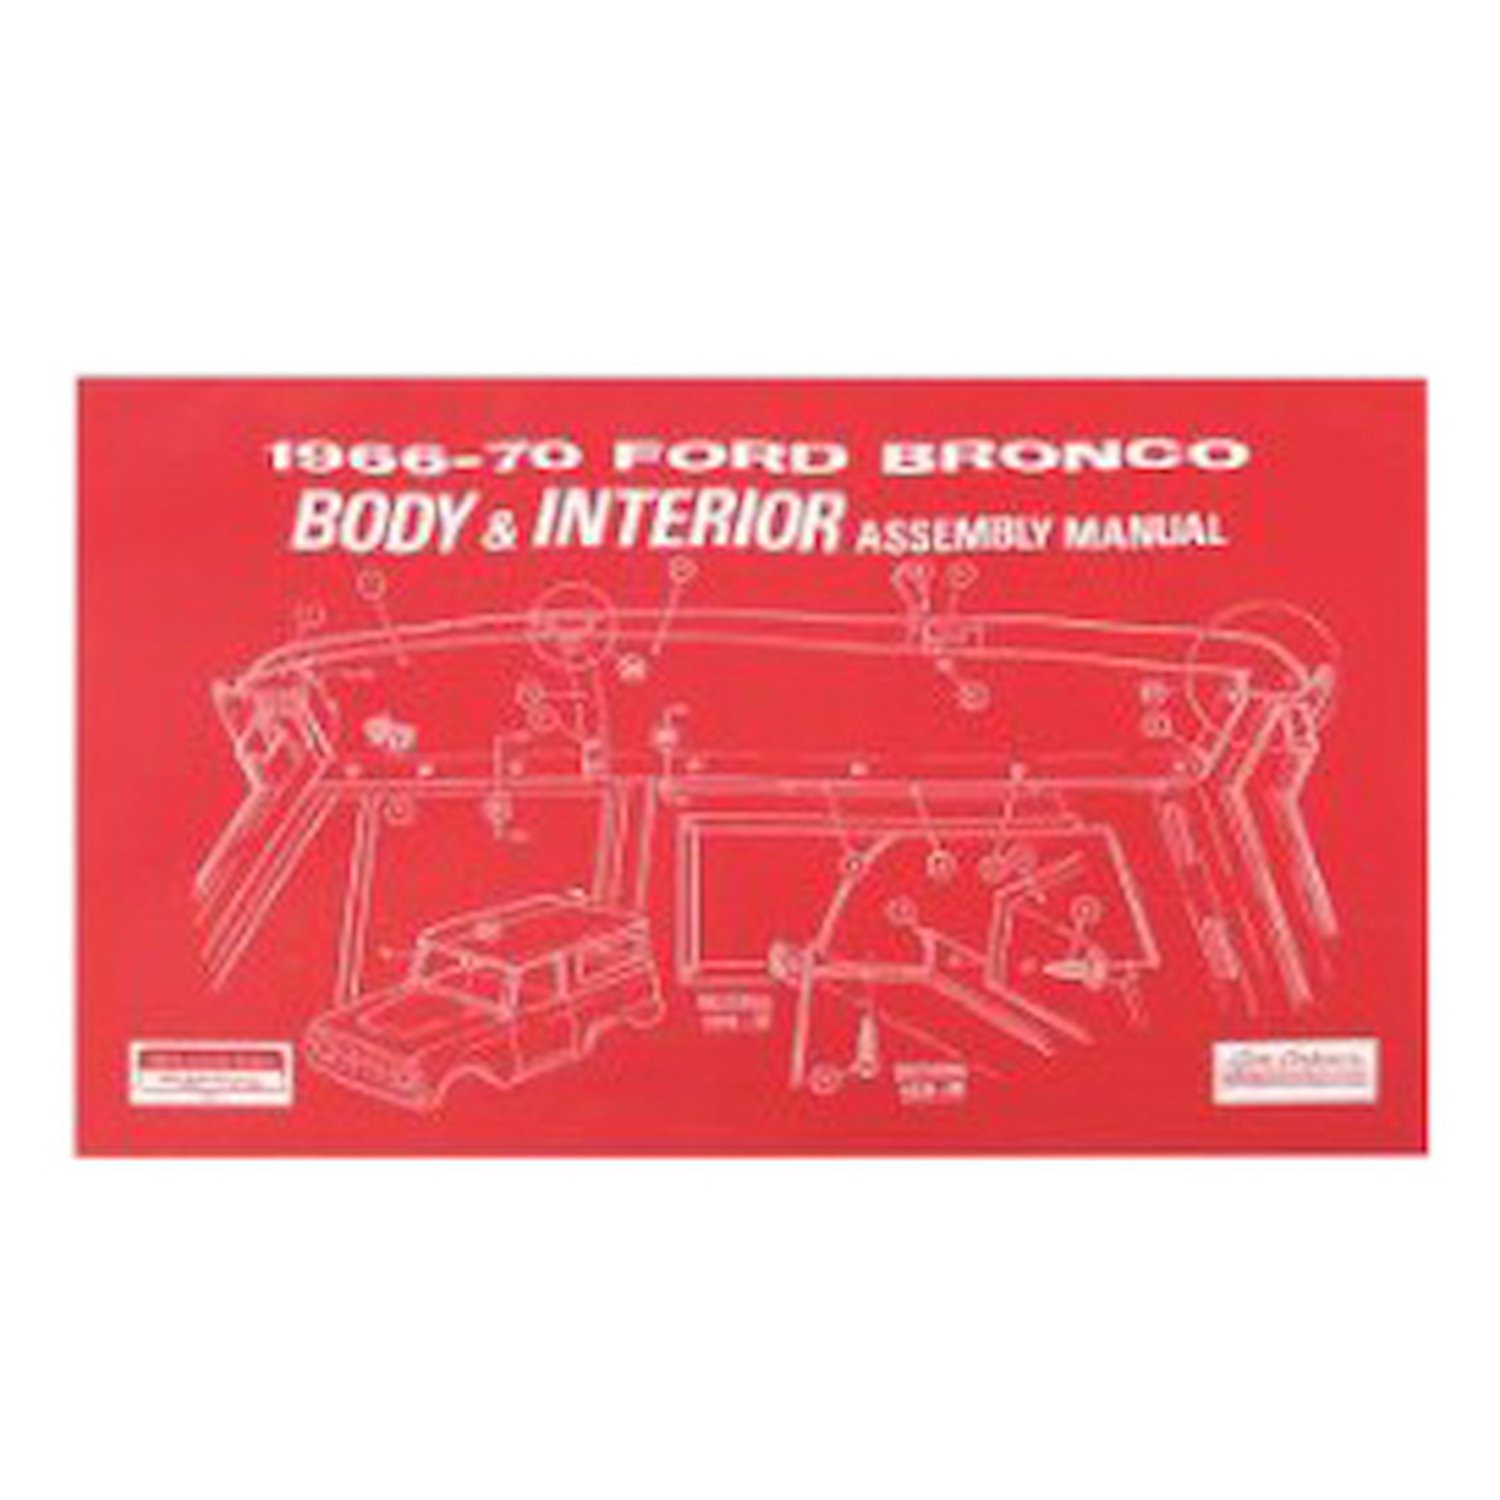 Body & Interior Assembly Manual for 1966-70 Ford Bronco